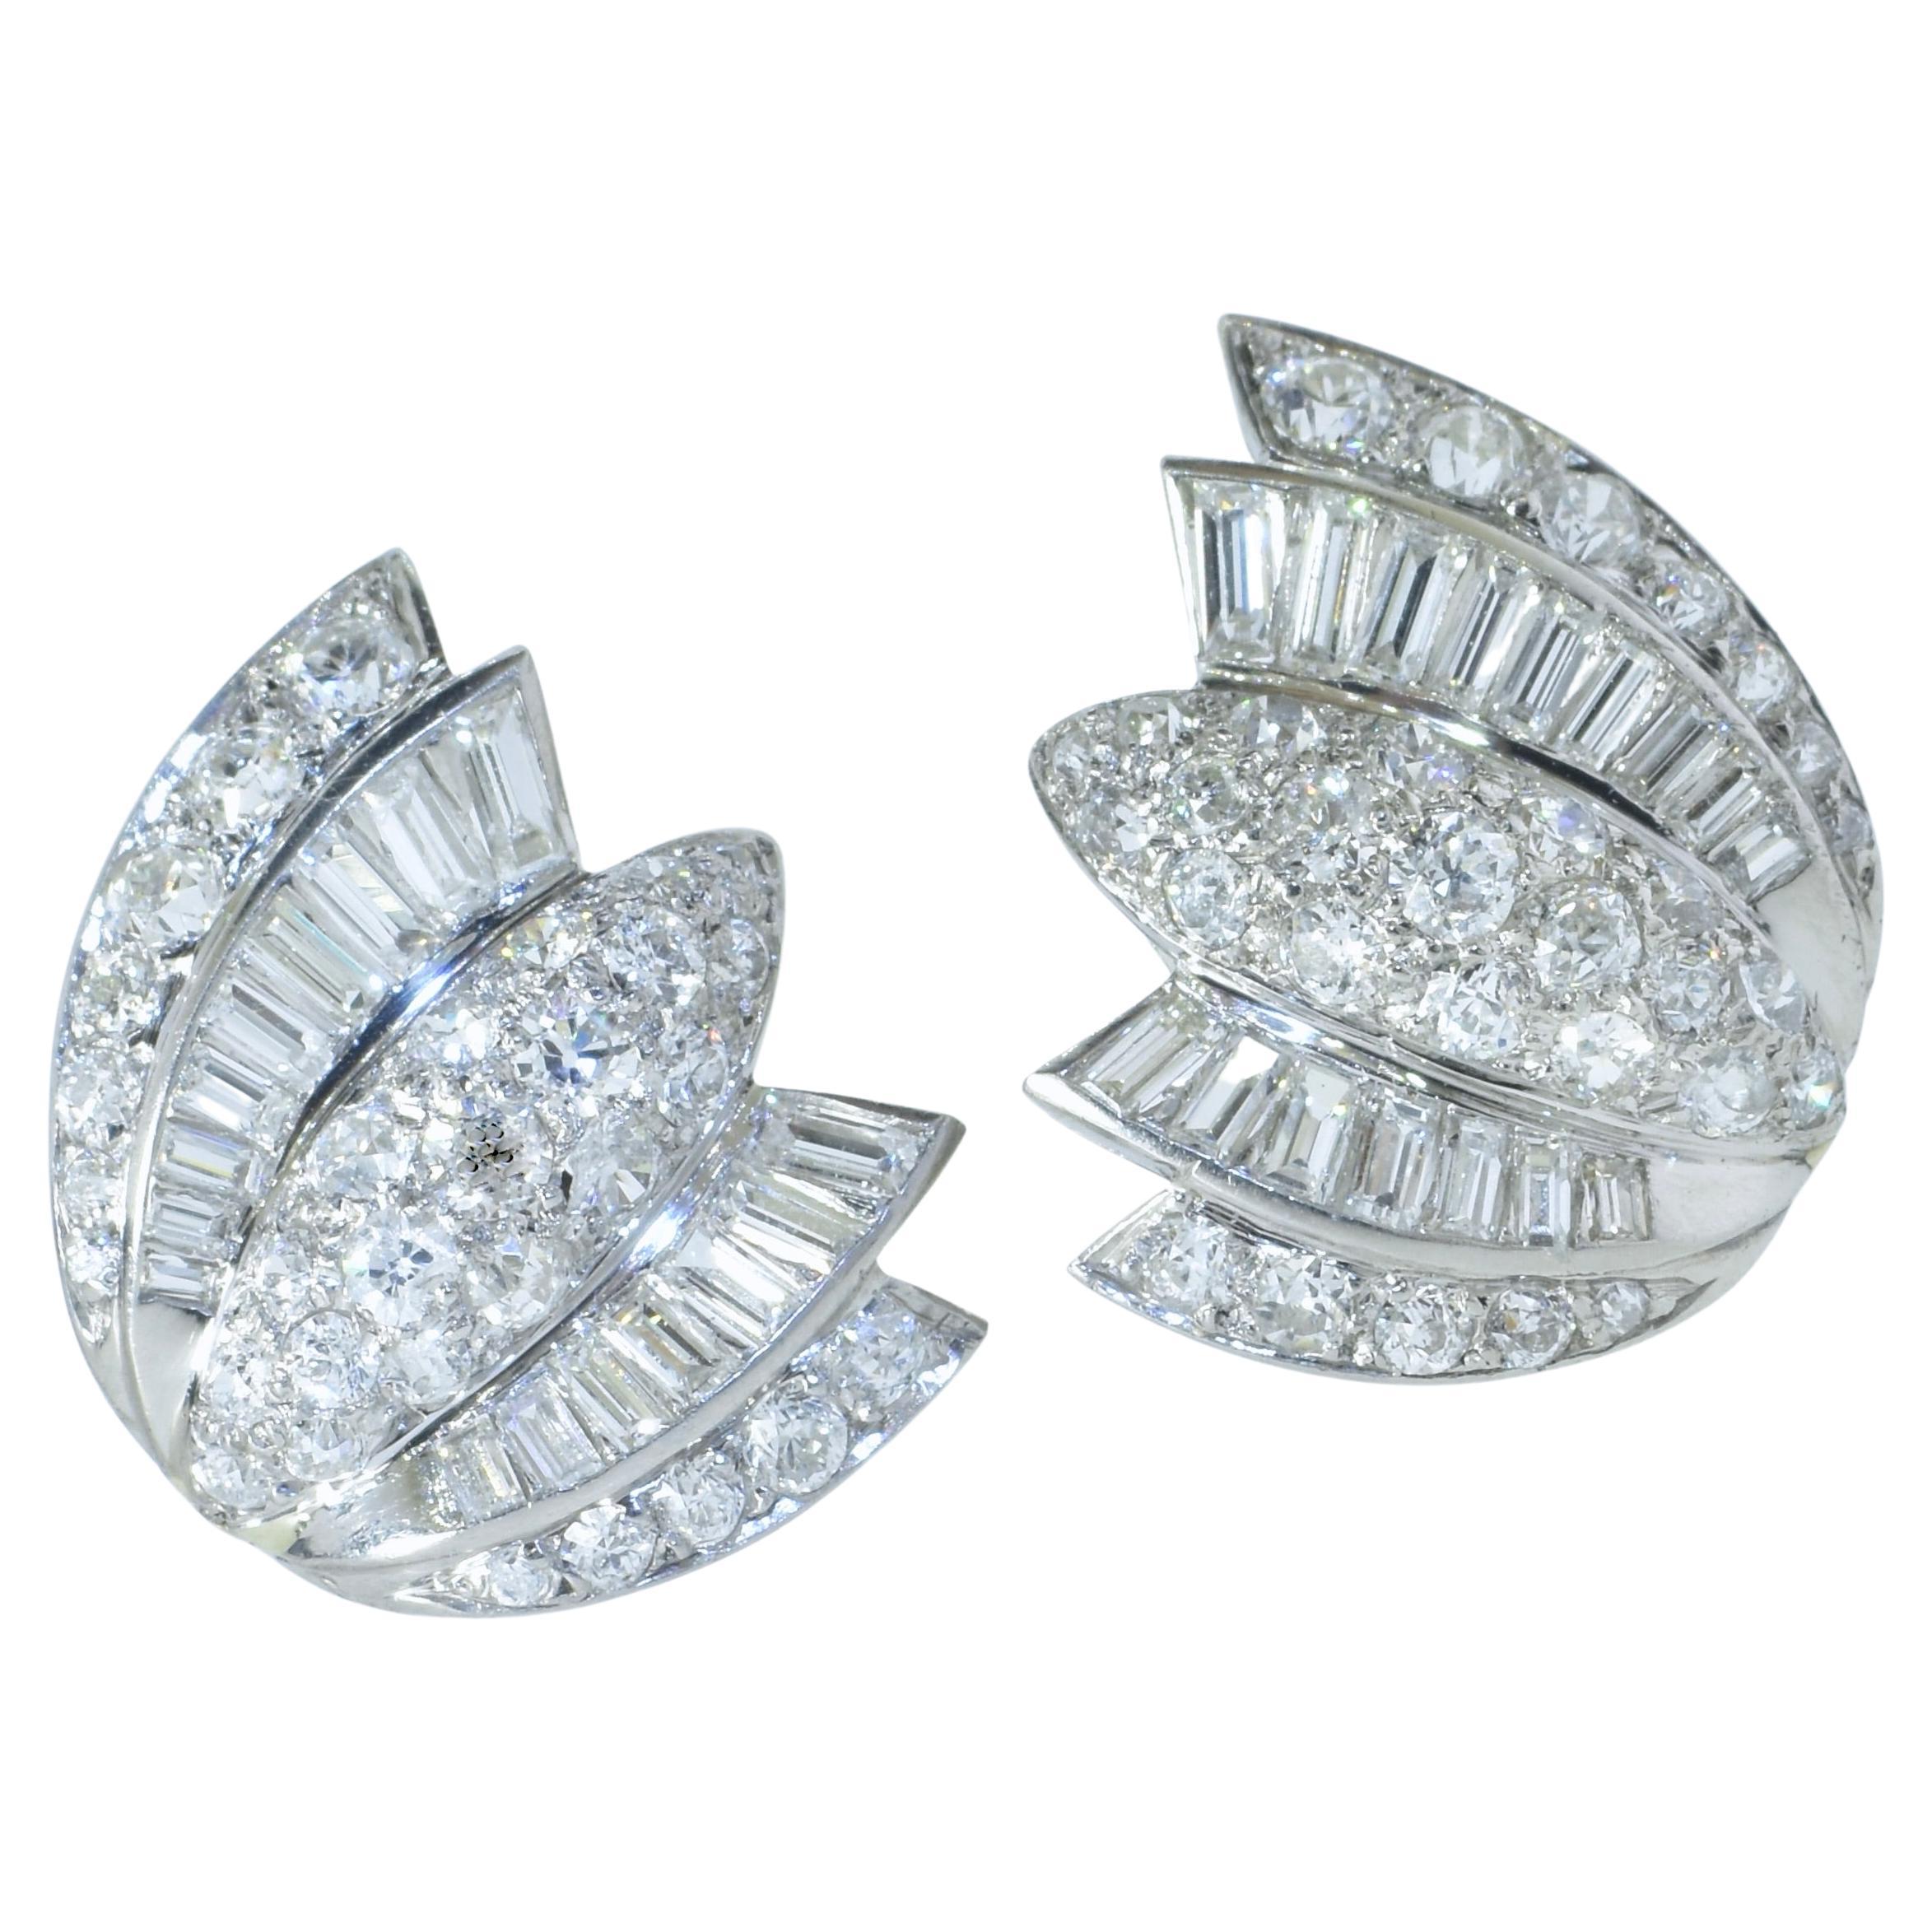 Women's or Men's Art Deco Earrings in Platinum and Fine Diamonds, French, circa 1930